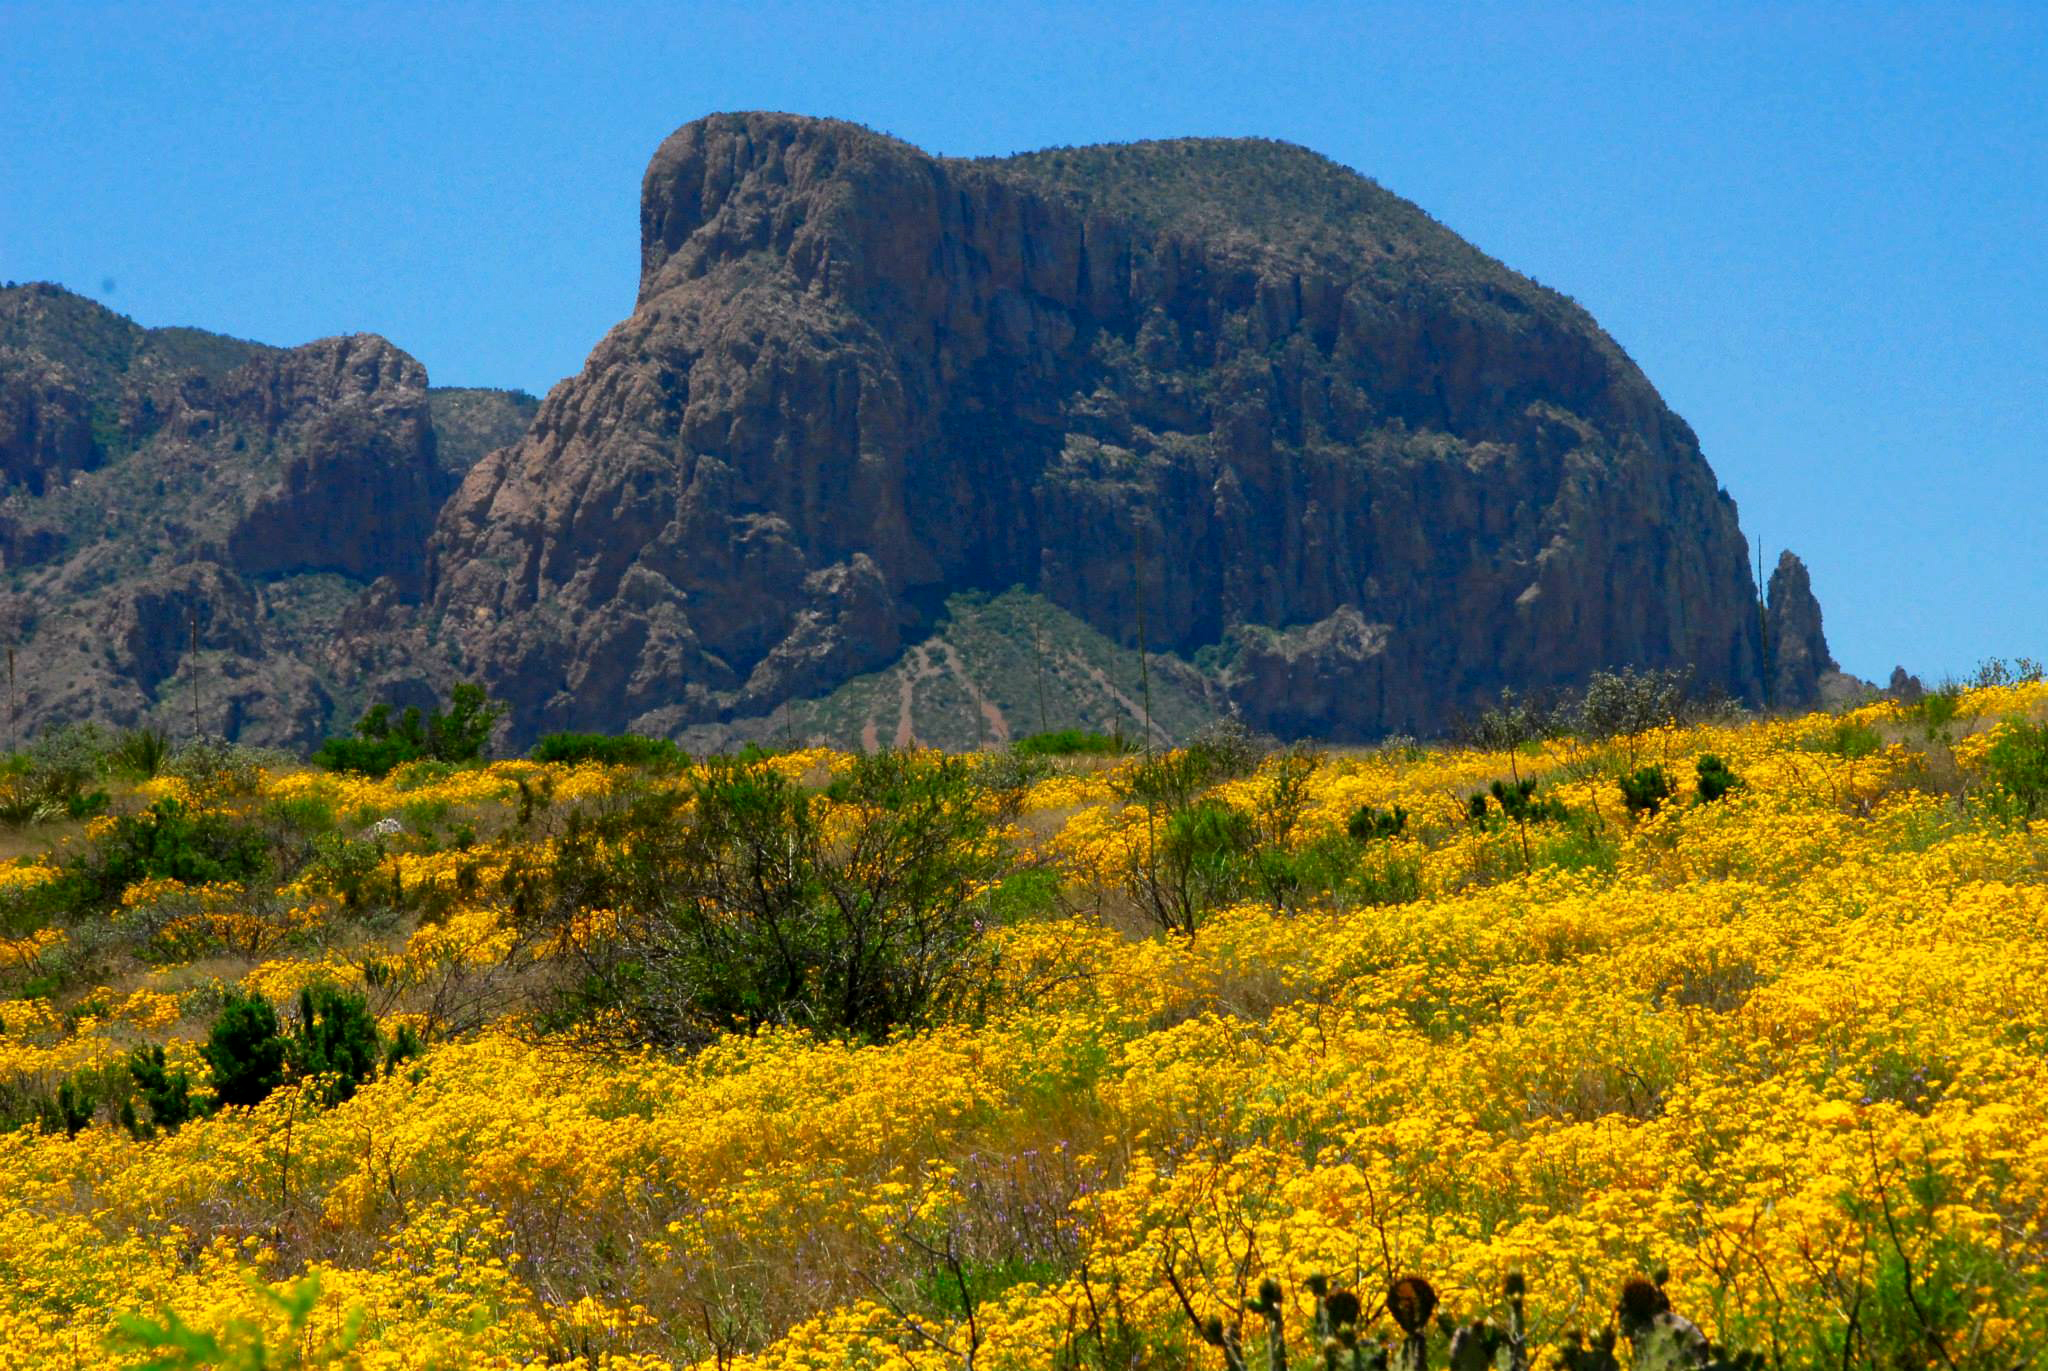 What is it about Big Bend?